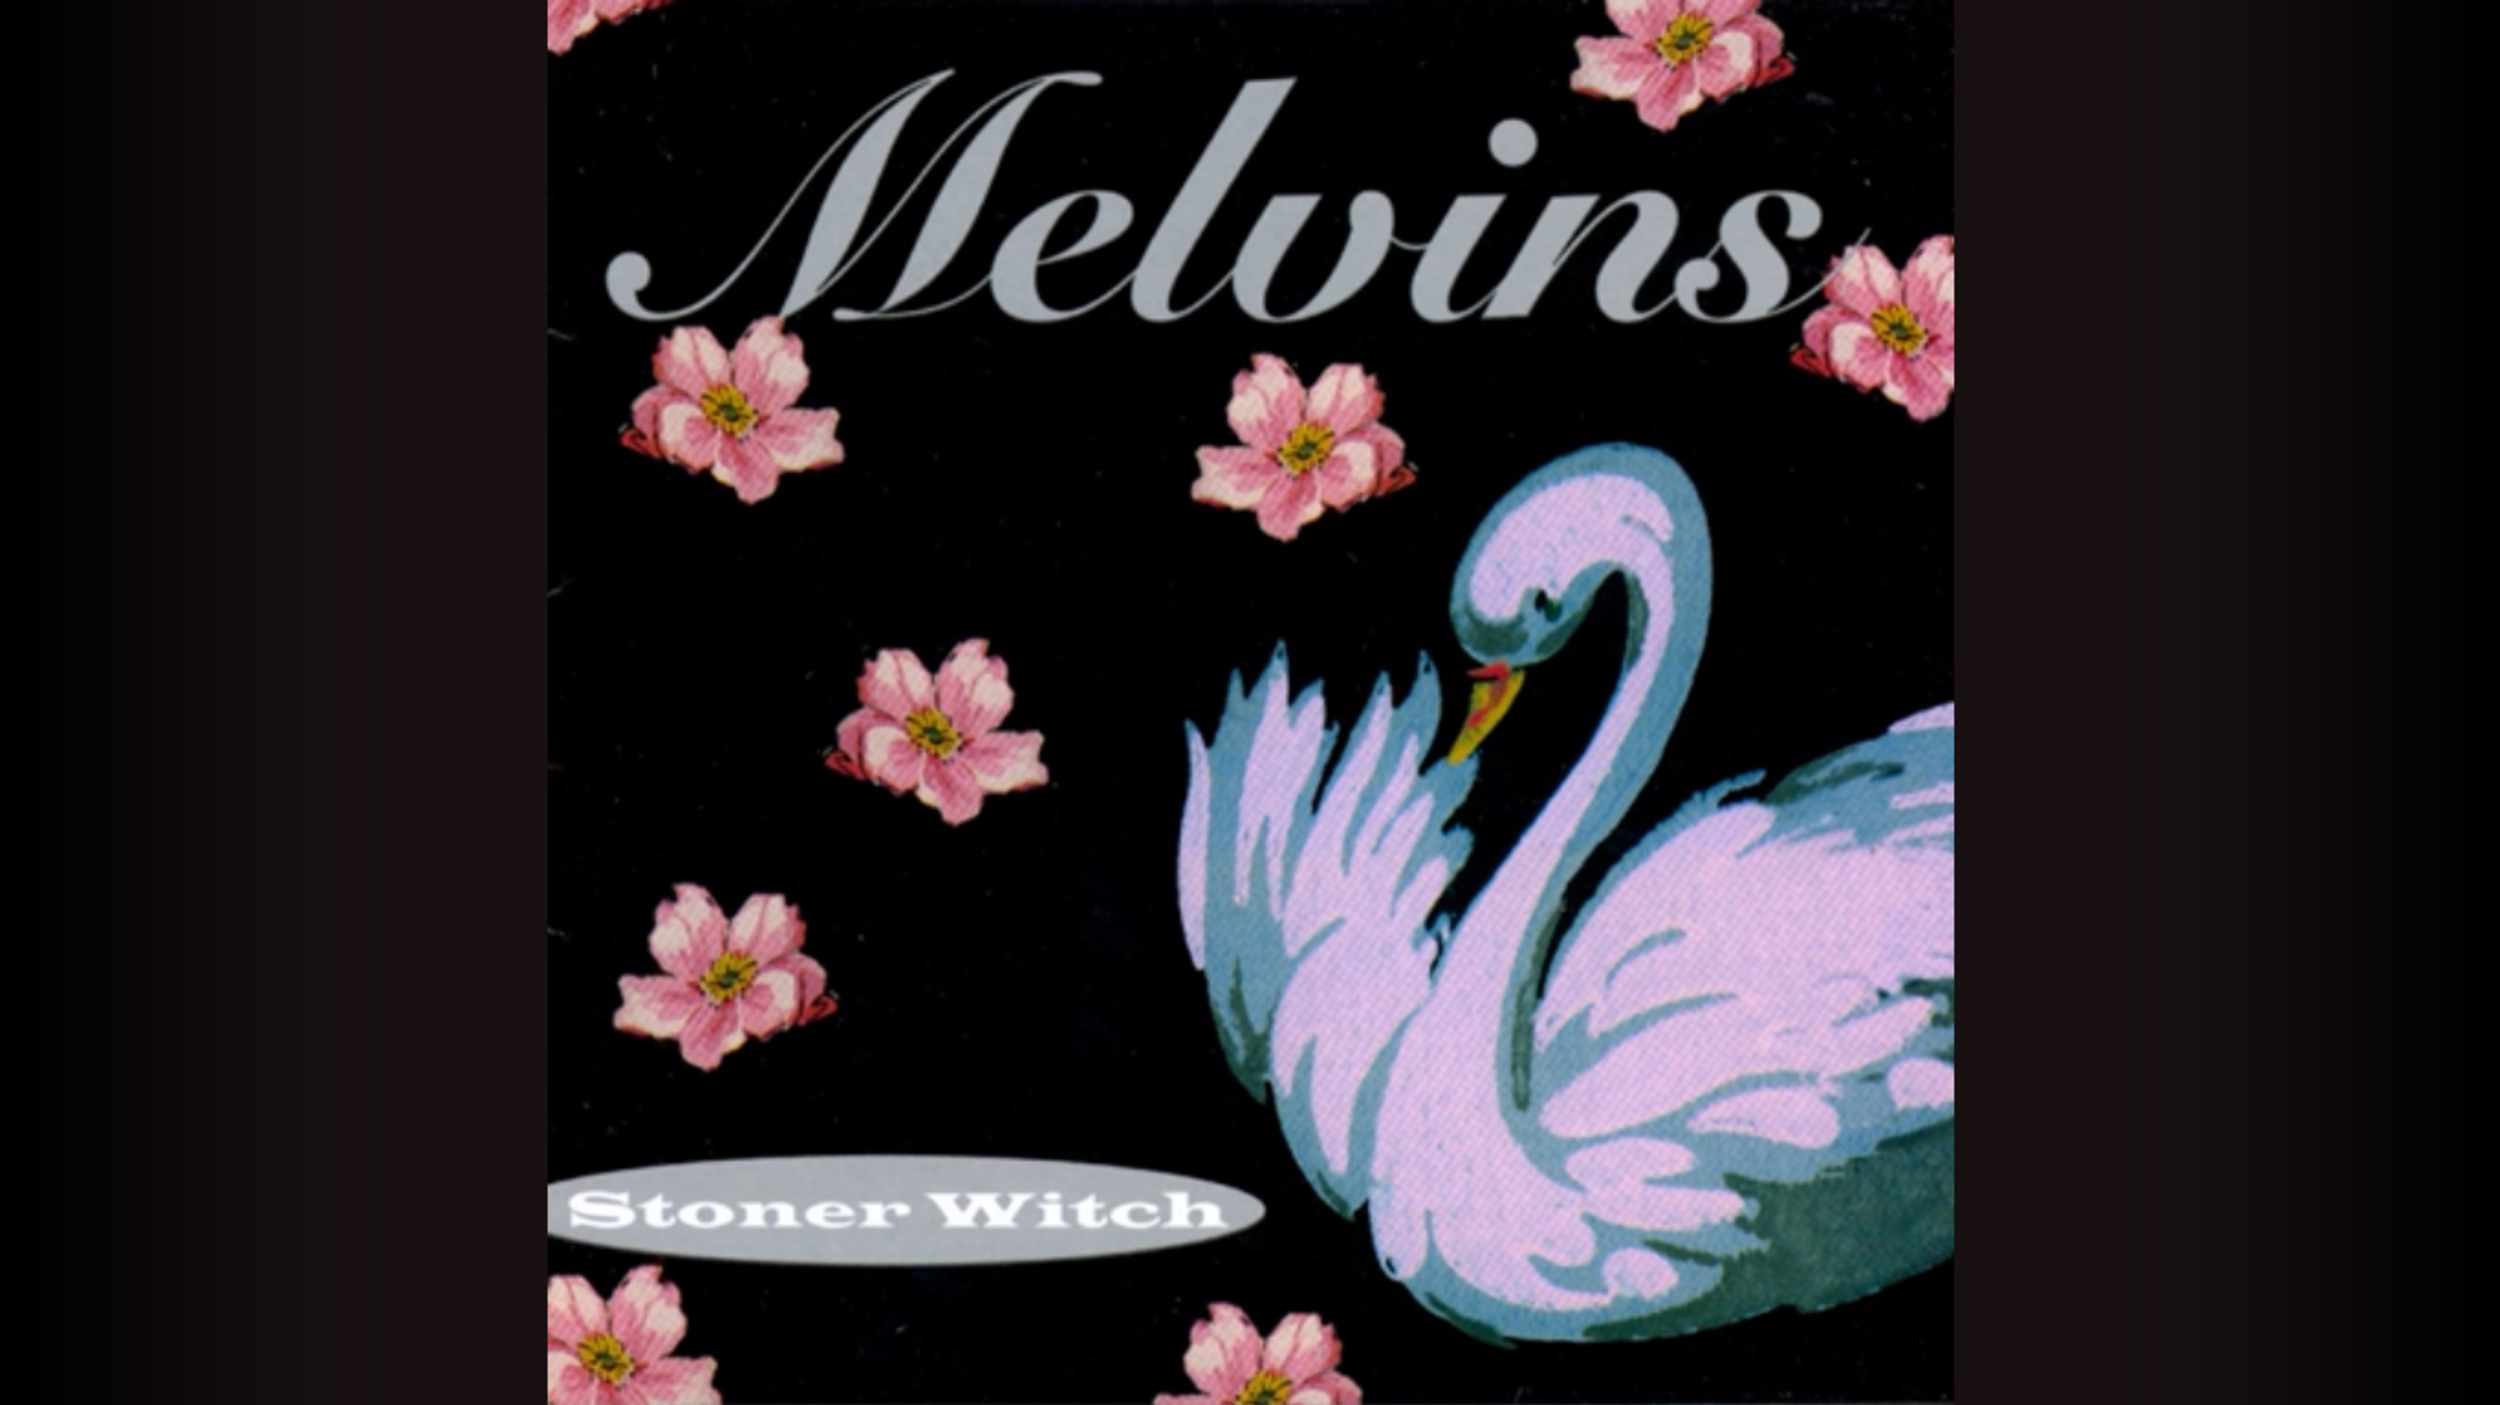 <p>It's pretty amazing that Melvins were on a major label, and it seems absolutely impossible that they lasted on Atantic for three albums. Truthfully, Atlantic cared so little about Melvins, they continues releasing singles, an album, and <em>a box set</em> on other labels... and none of it was archival, it was new material. <em>Stoner Witch</em> is front loaded with fast and heavy songs, and then capped off with three bizarre instrumentals. This band has always subverted expectations.</p><p>You may also like: <a href='https://www.yardbarker.com/entertainment/articles/20_celebrities_you_forgot_were_in_hit_animated_movies/s1__40099333'>20 celebrities you forgot were in hit animated movies</a></p>